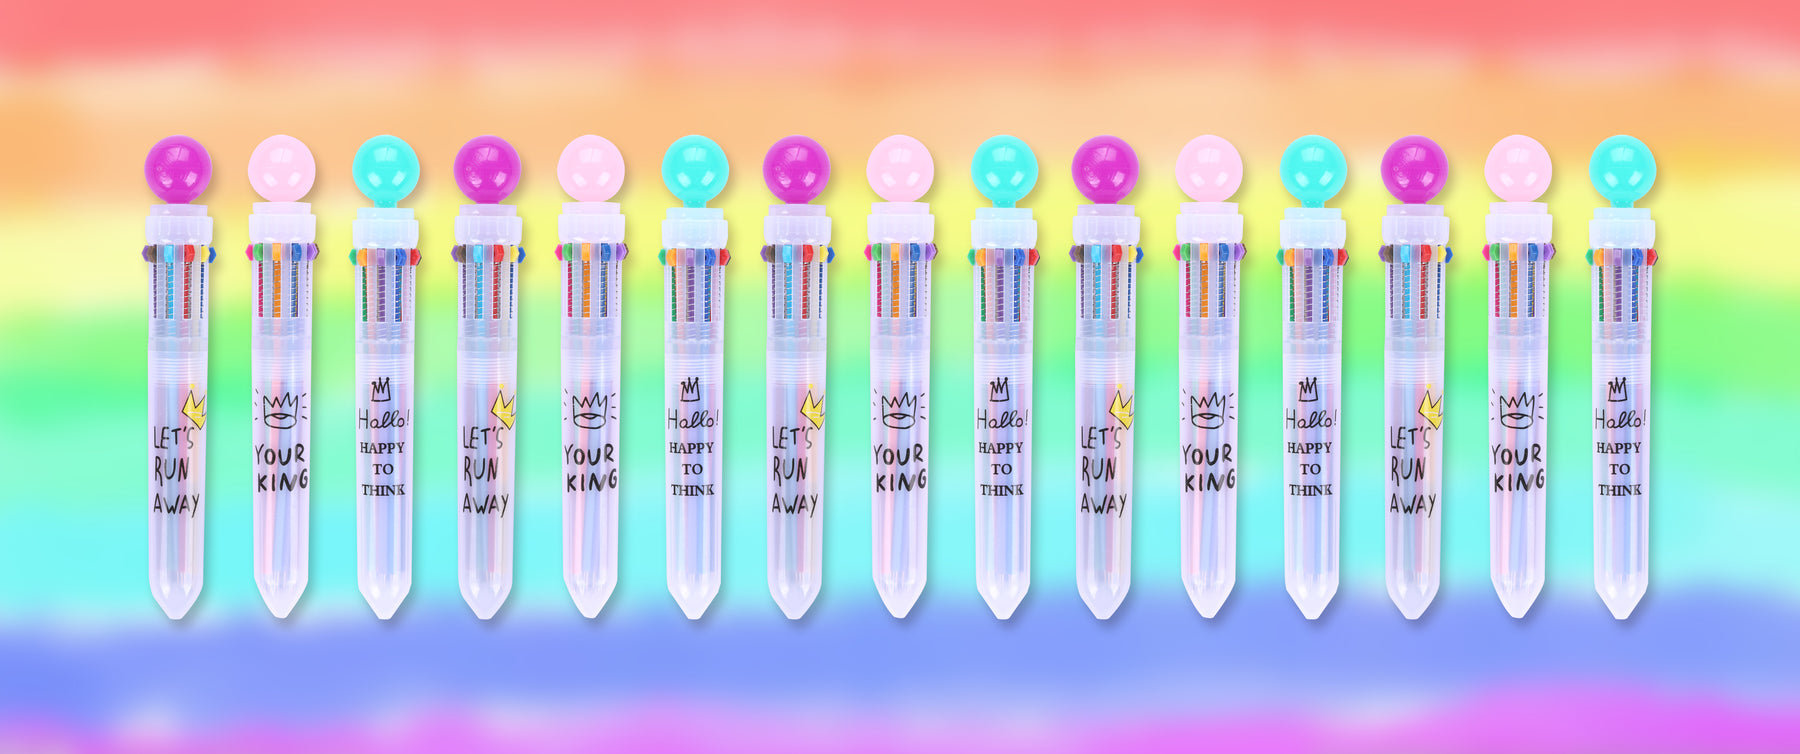 Get A Free Rainbow 8 Color Multifunction Pen For Order Over 35USD